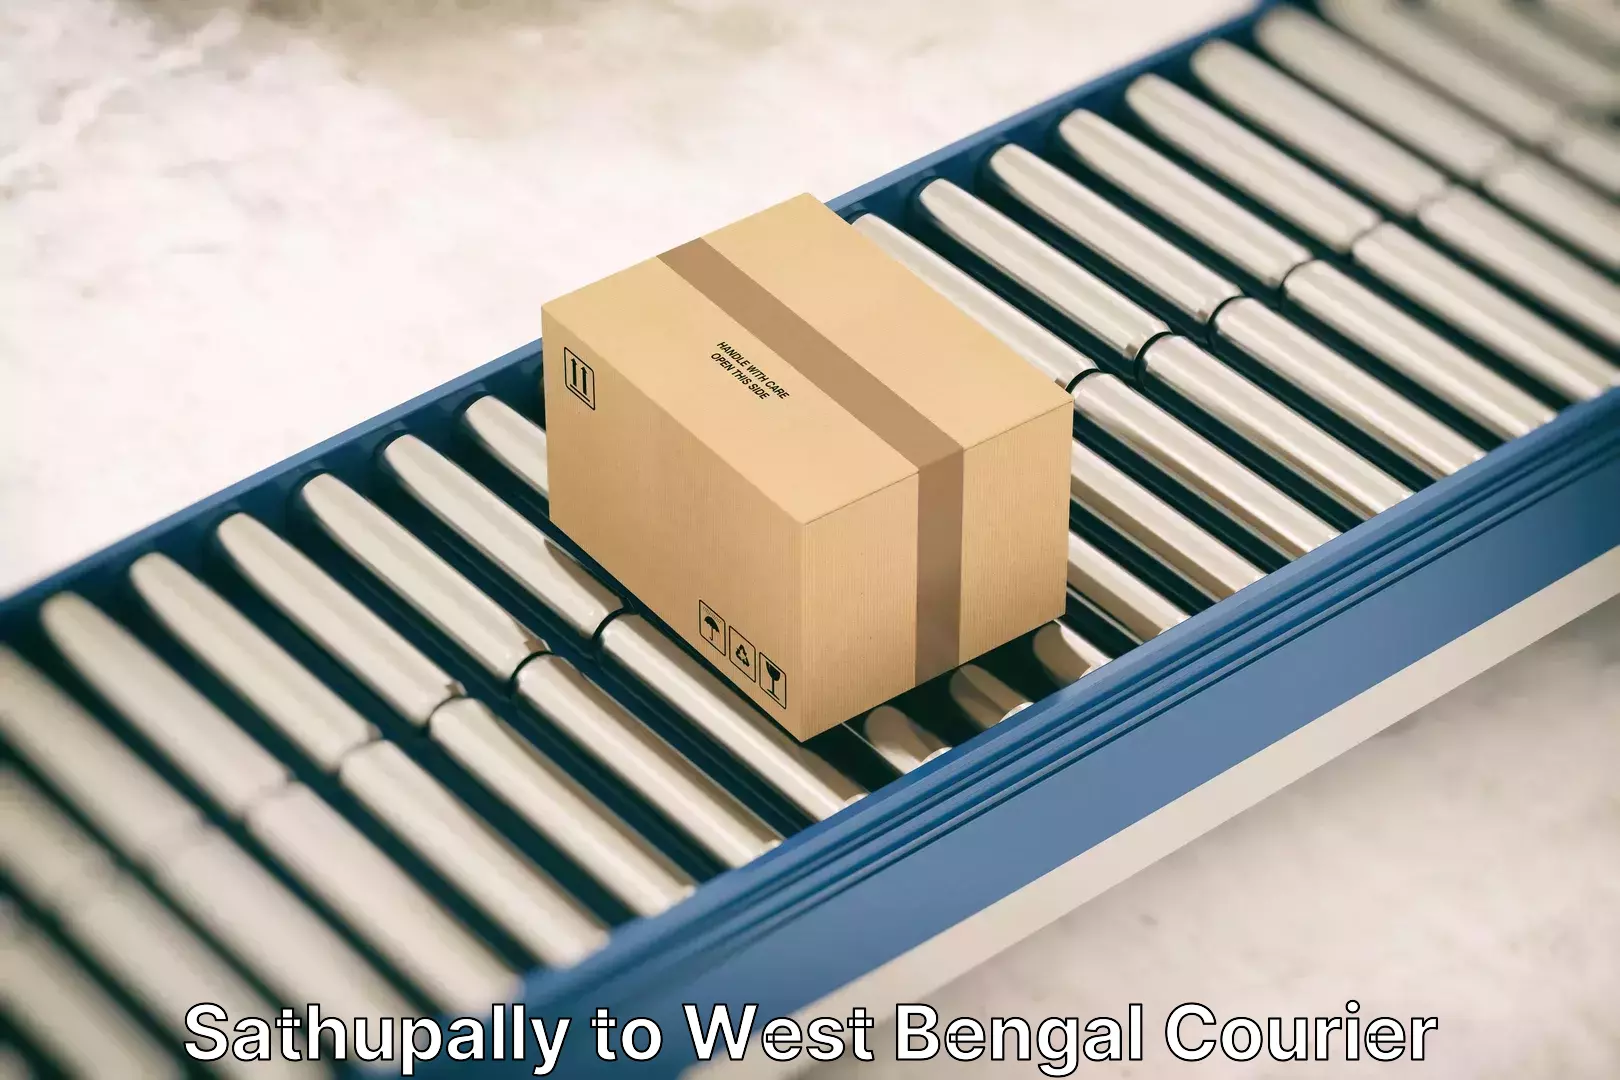 Furniture delivery service Sathupally to West Bengal